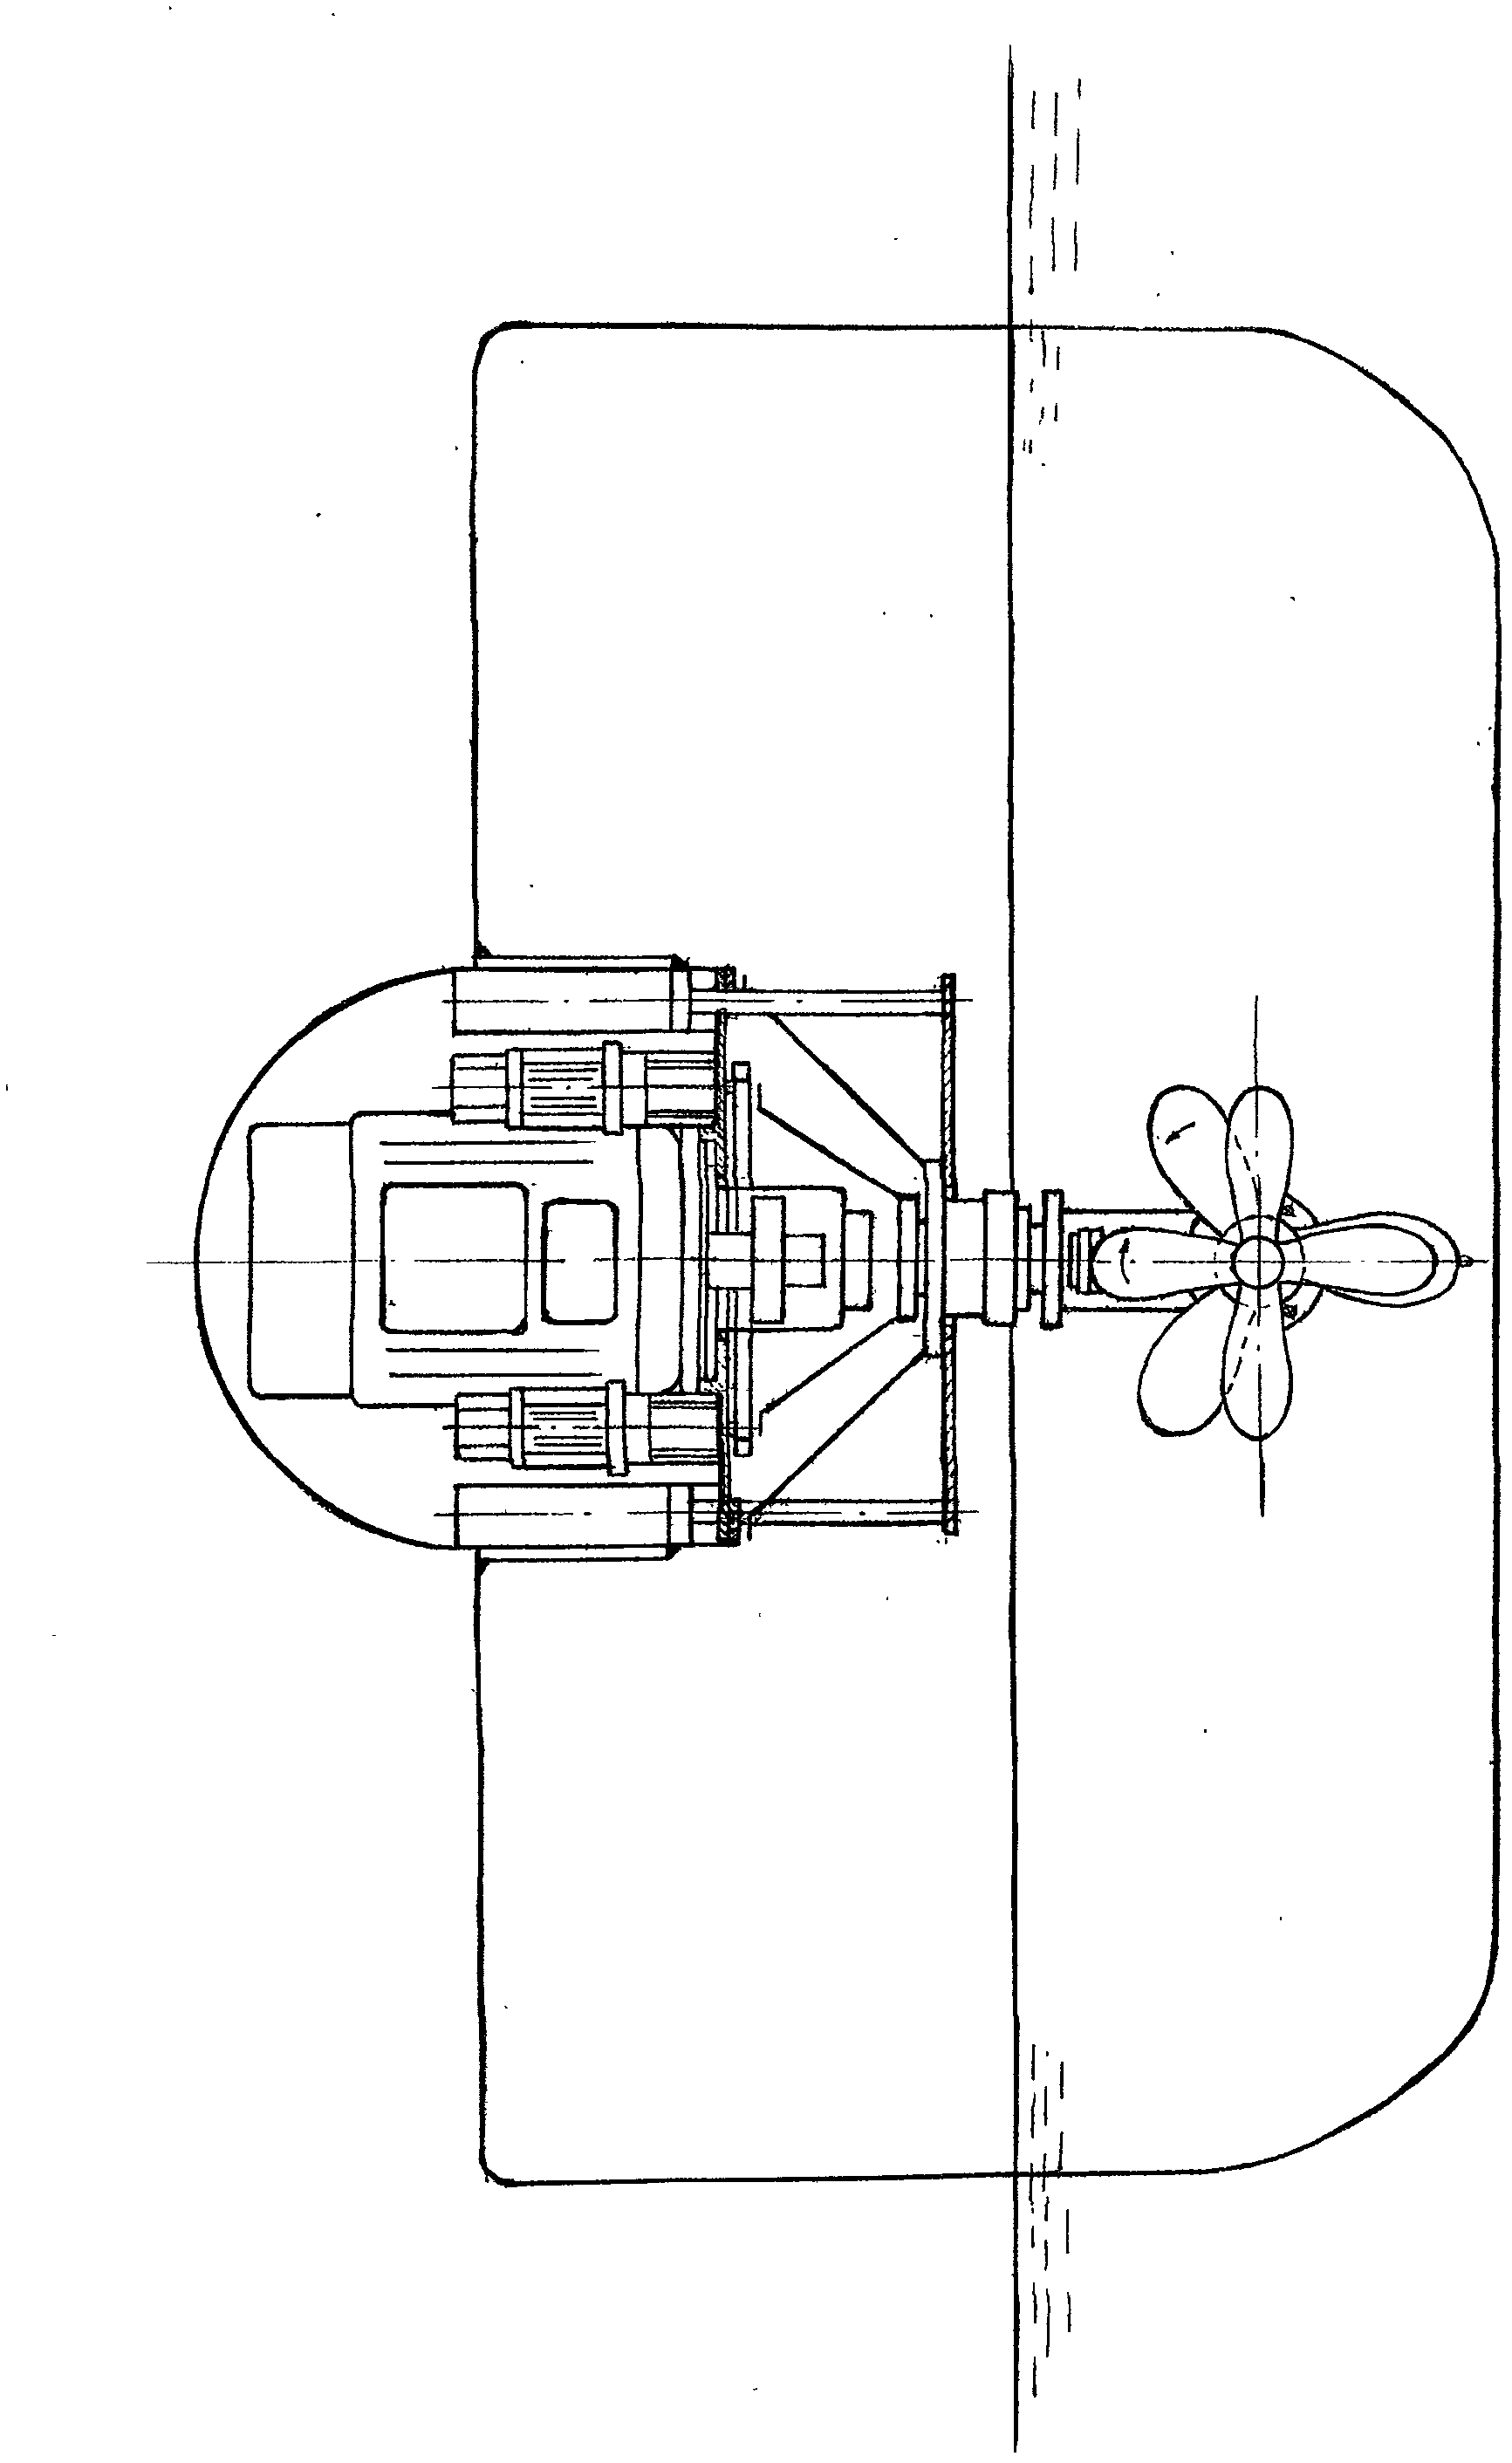 Electric full-circle rotation inboard and outboard (double-motor) contra-rotating propeller propulsion unit